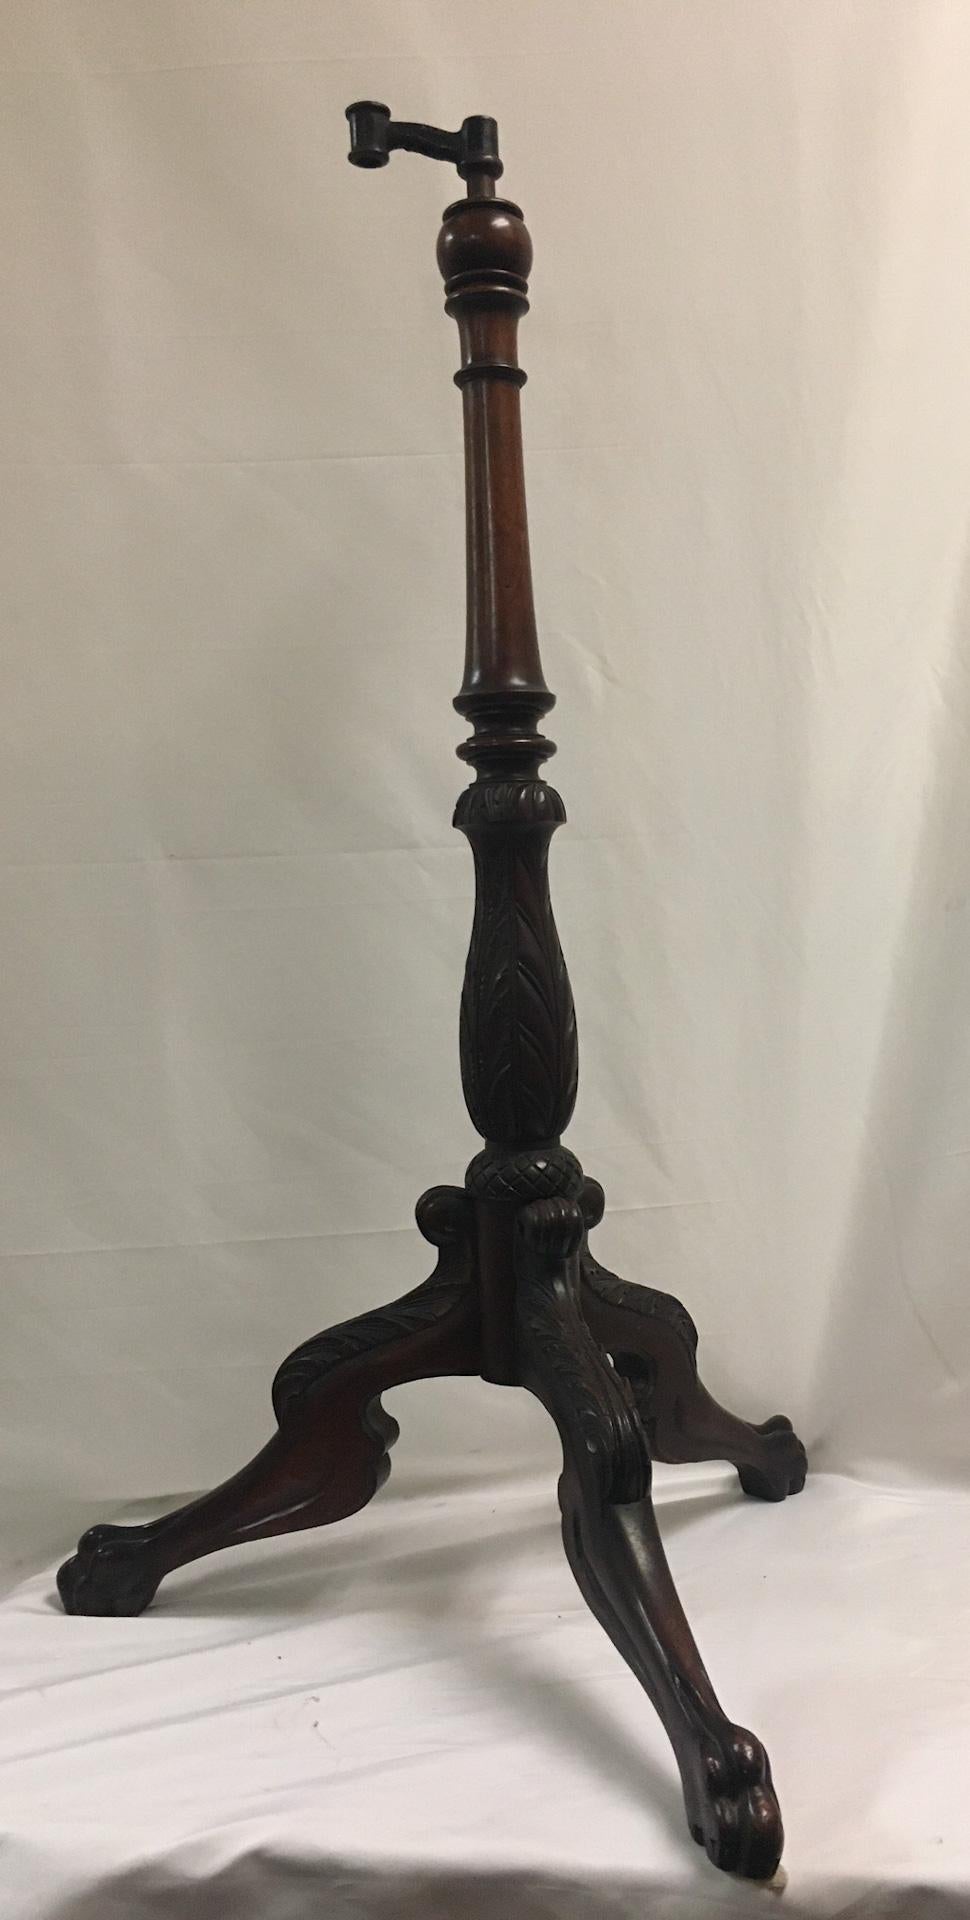 This unique floor-standing adjustable mahogany stand could accommodate both music or a book. Features include an acanthus leaf motif carved central shaft and knees on a tripod configuration terminating in paw feet, There is a a suede type material